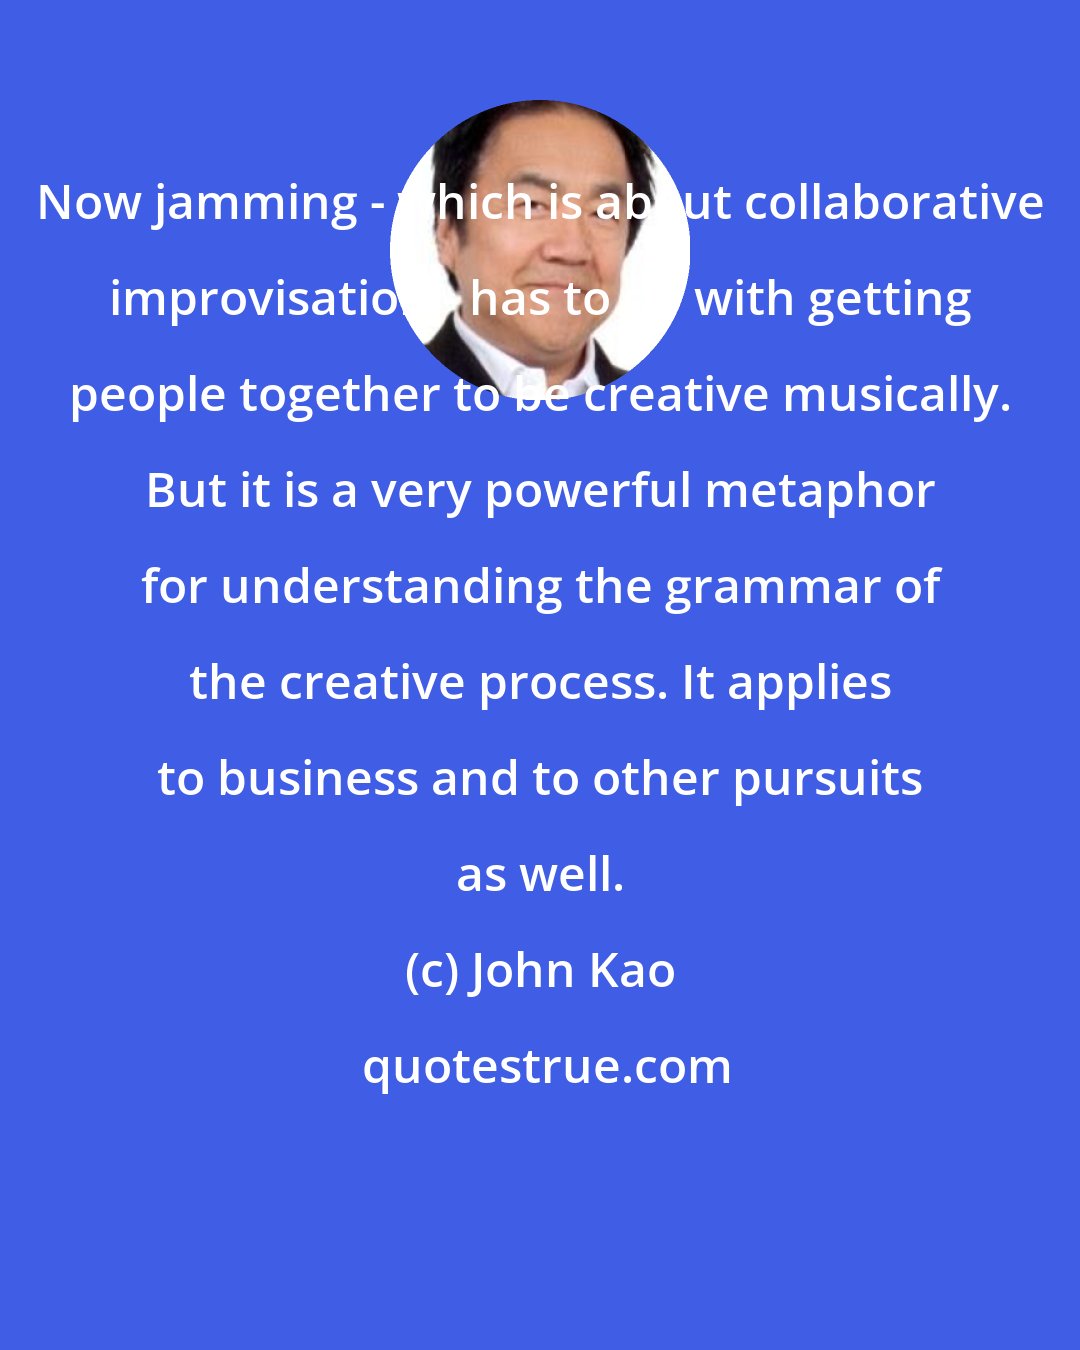 John Kao: Now jamming - which is about collaborative improvisation - has to do with getting people together to be creative musically. But it is a very powerful metaphor for understanding the grammar of the creative process. It applies to business and to other pursuits as well.